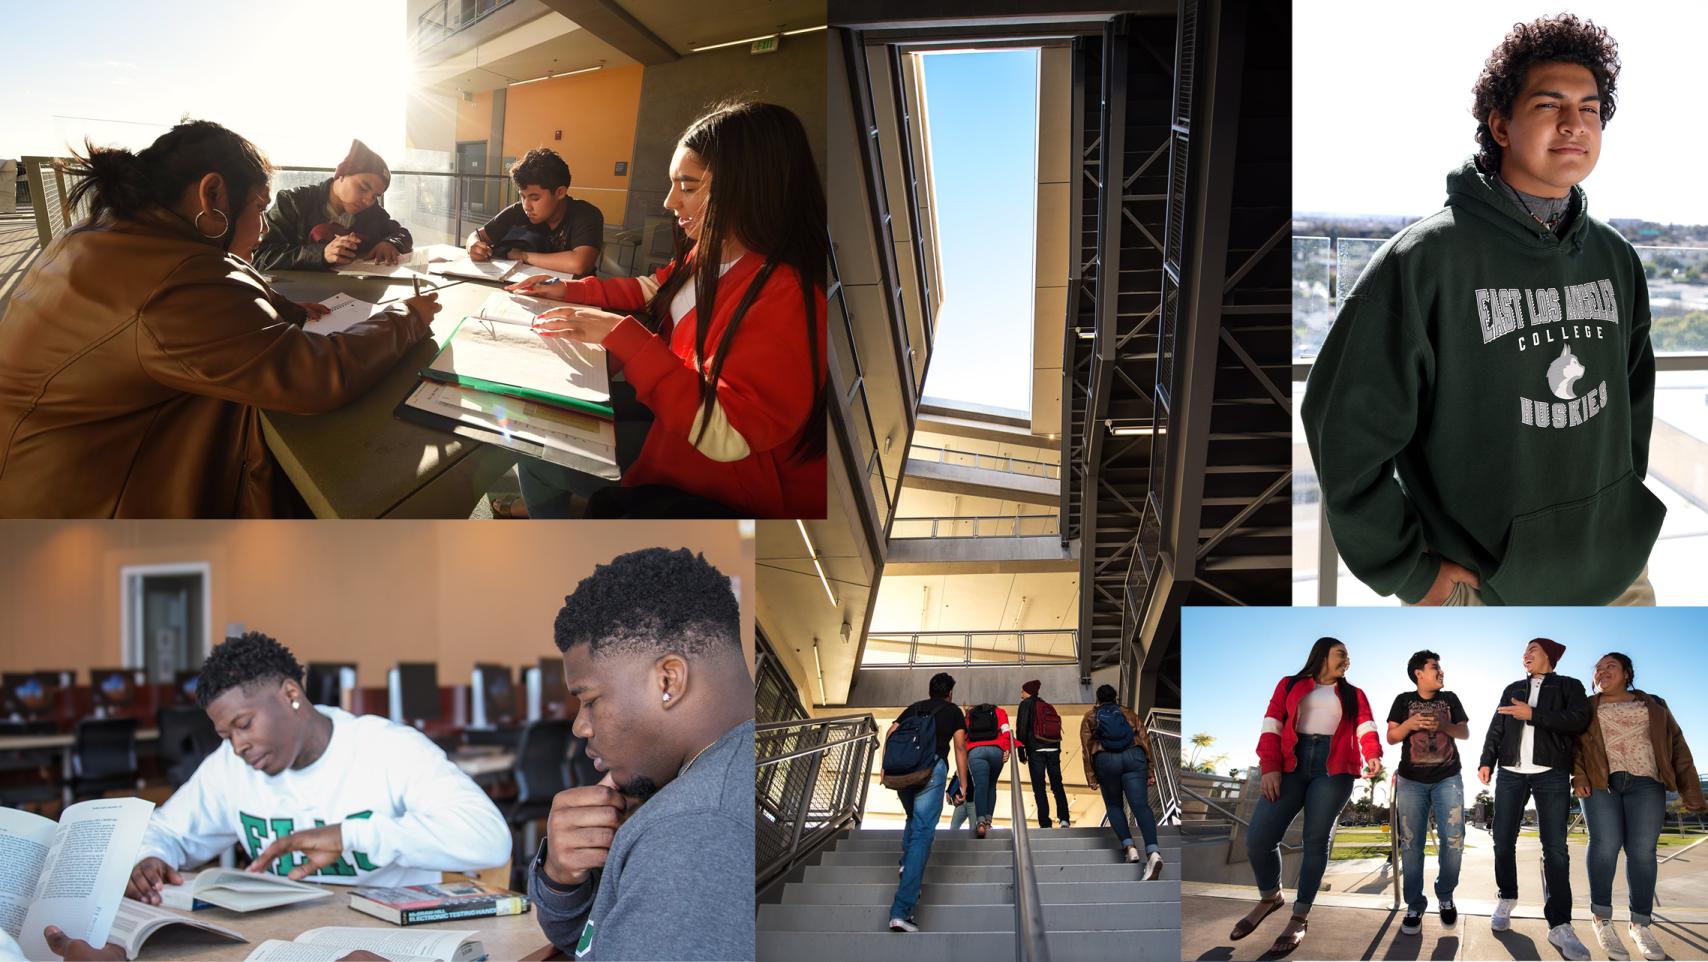 Collage of East Los Angeles college students interacting.